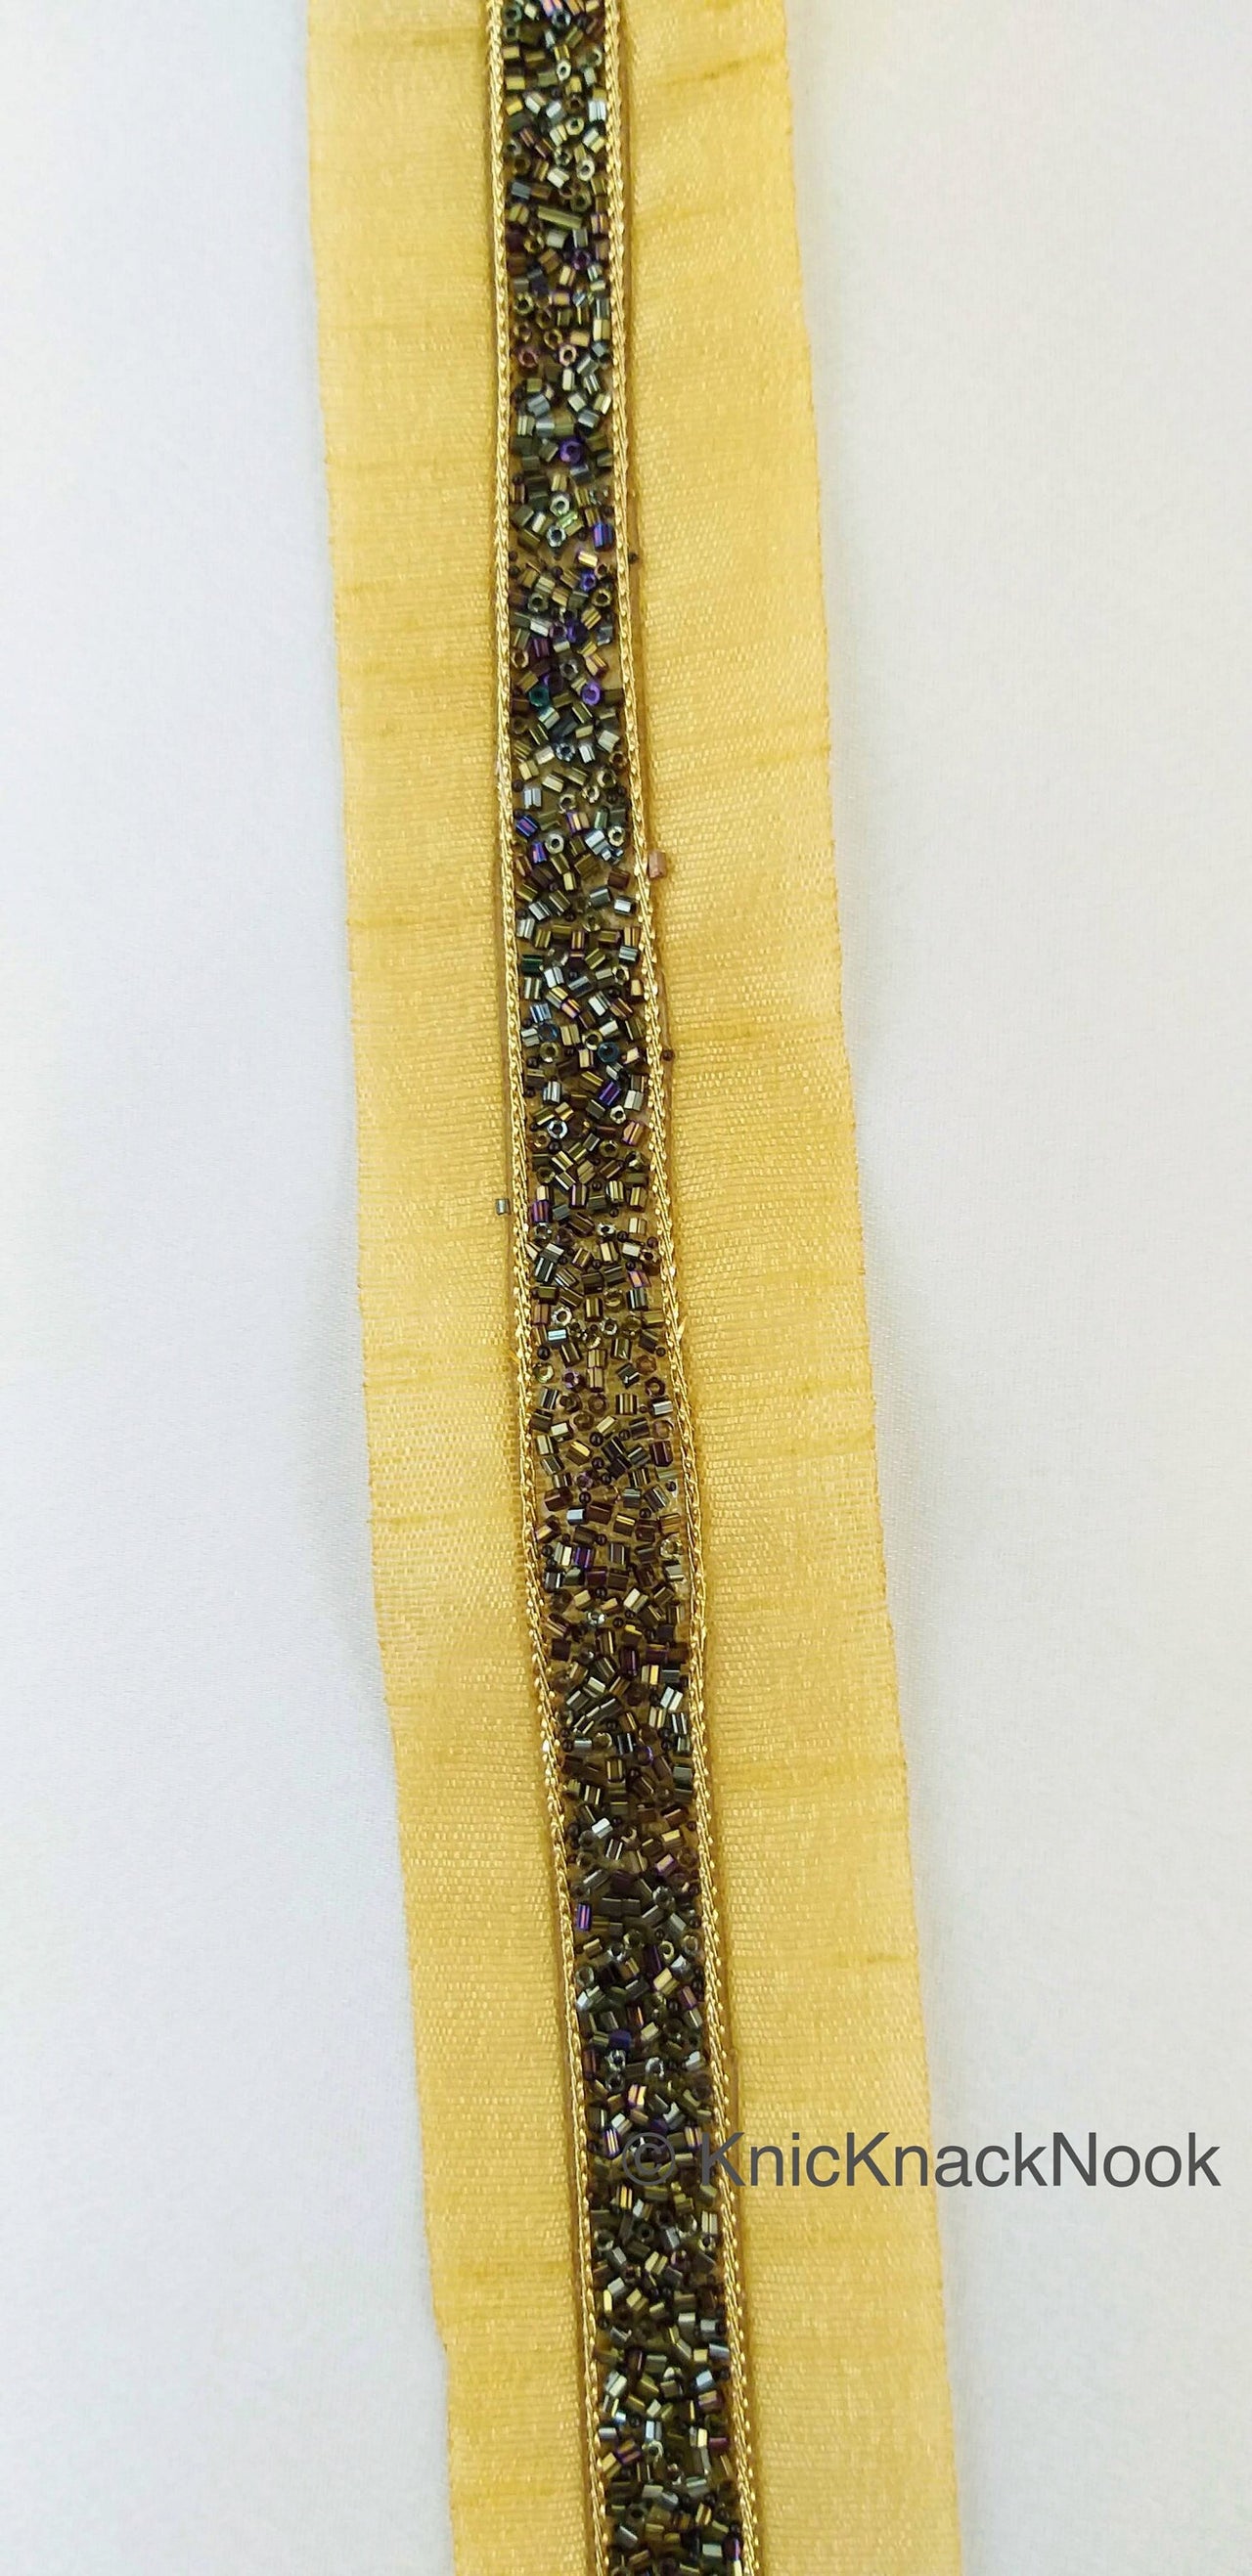 Antique Gold Beige Fabric Trim With Beads Embellishments, Beaded Trim, Approx. 50mm